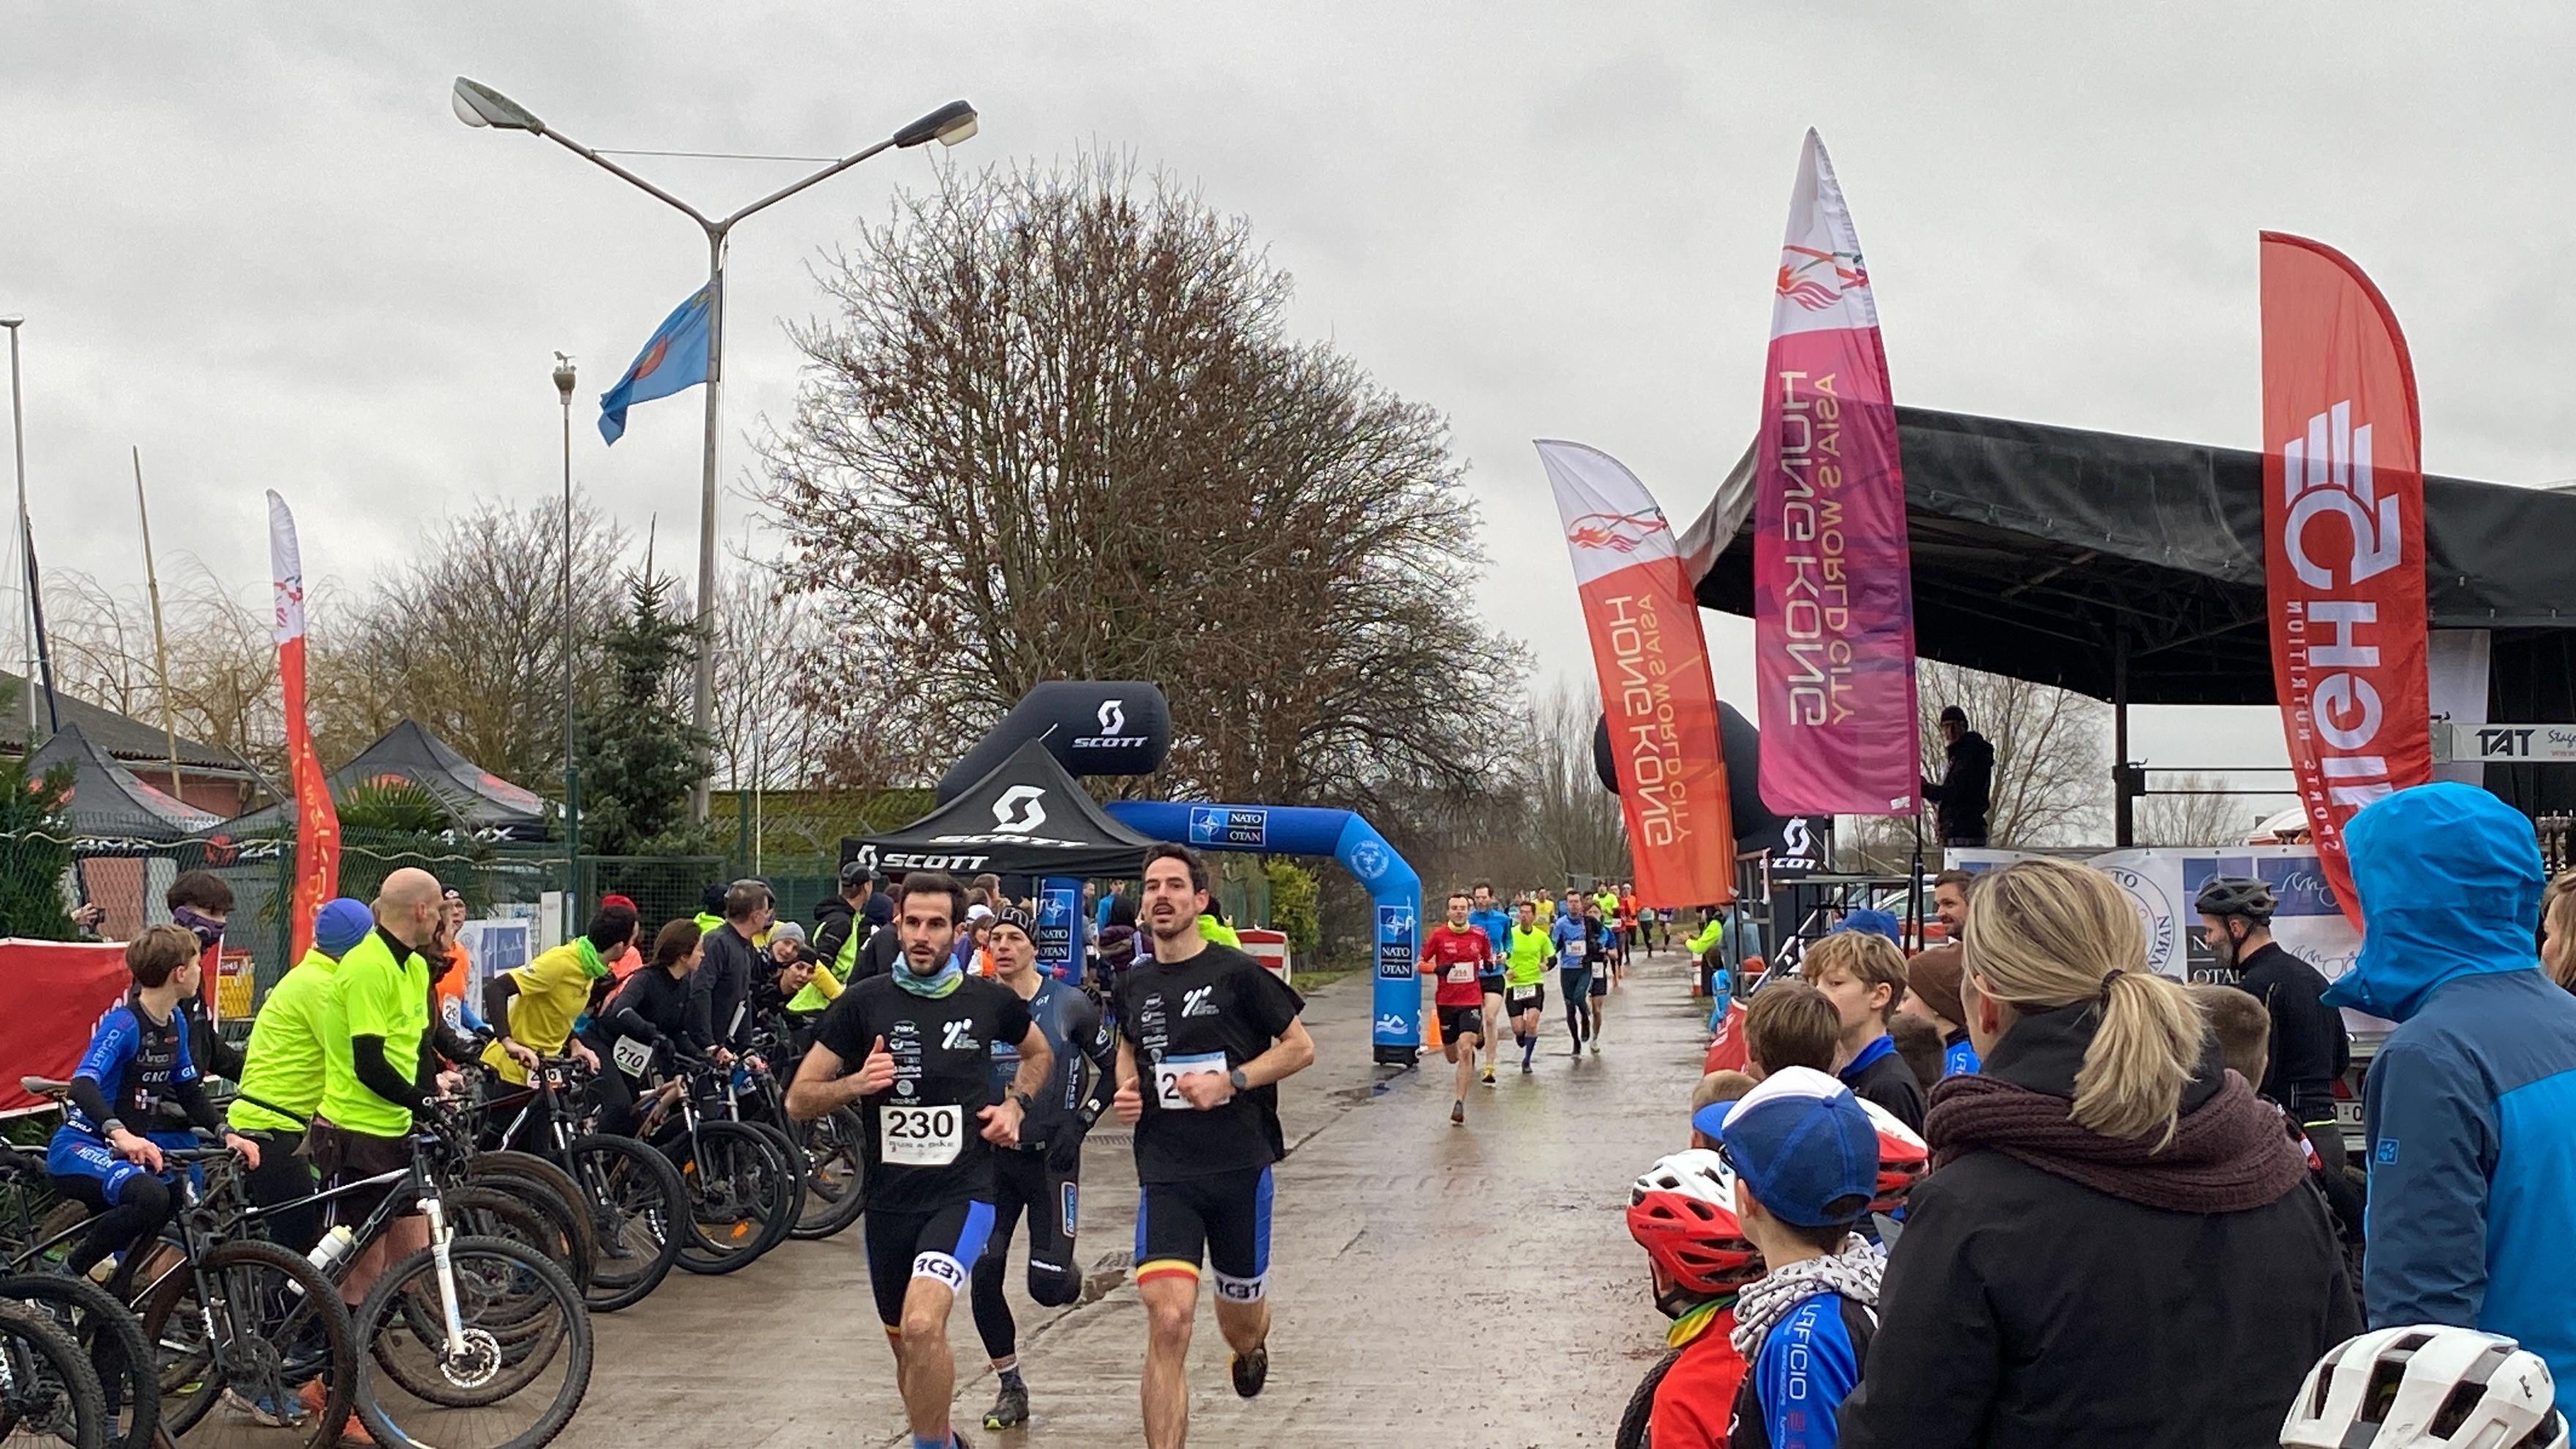 The Hong Kong Economic and Trade Office in Brussels supported the 2024 Run & Bike event held in Vilvoorde, Belgium on January 6 (Brussels time) to promote Hong Kong as a green and sport-friendly international city.